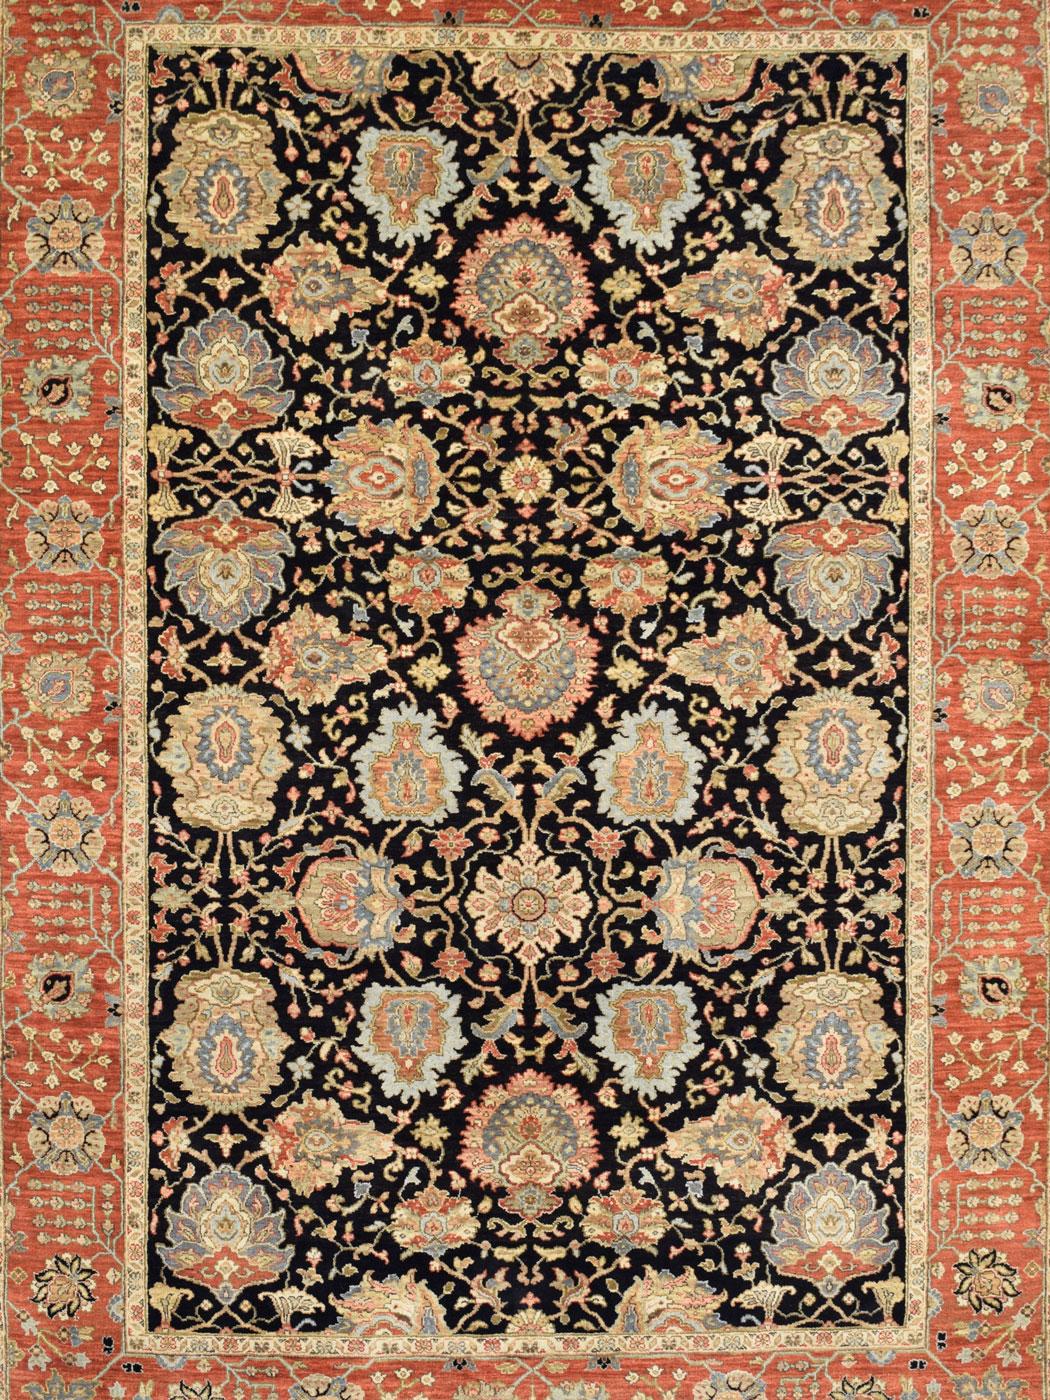 Indian Hand-Knotted Persian Agra Carpet, Red, Orange, and Black Wool, 6' x 9' For Sale